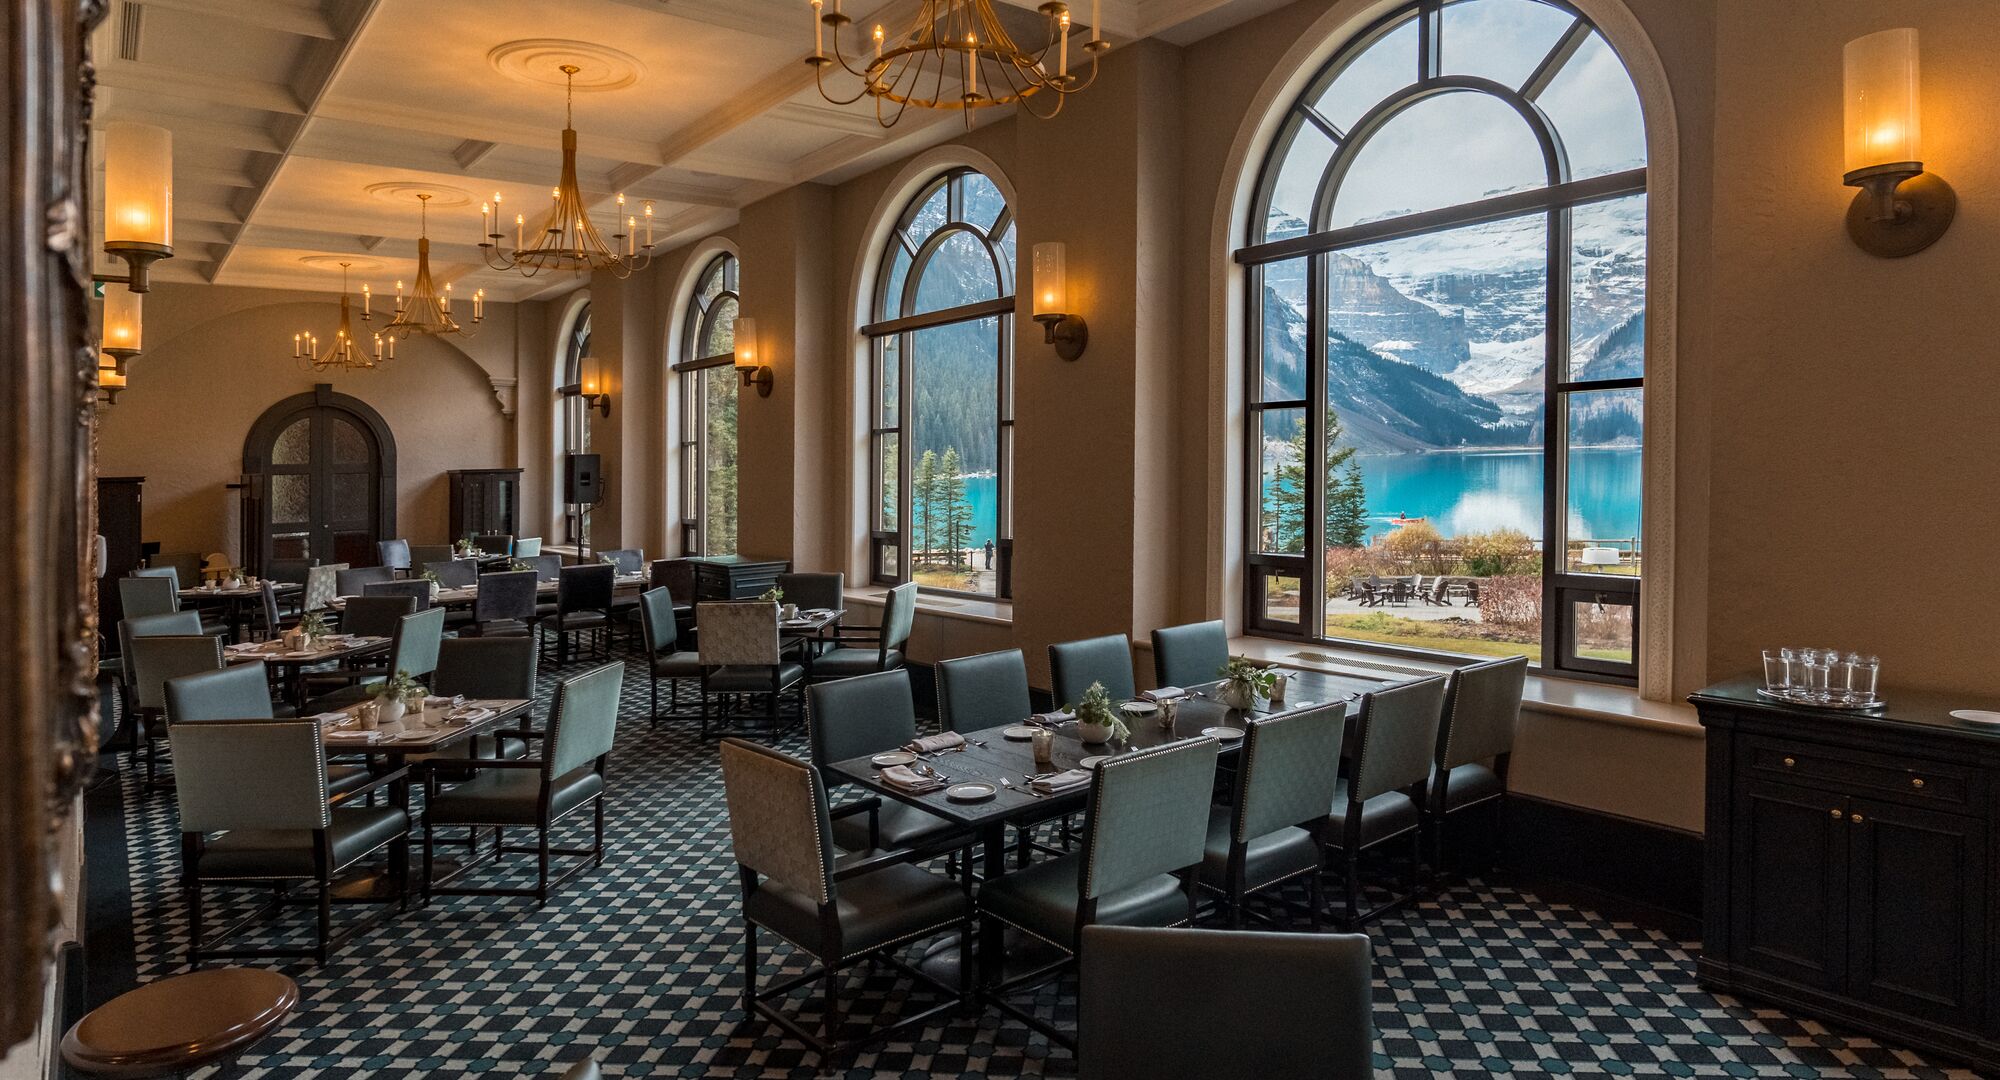 View of the dining area where the Fairmont Chateau Lake Louise afternoon tea is held